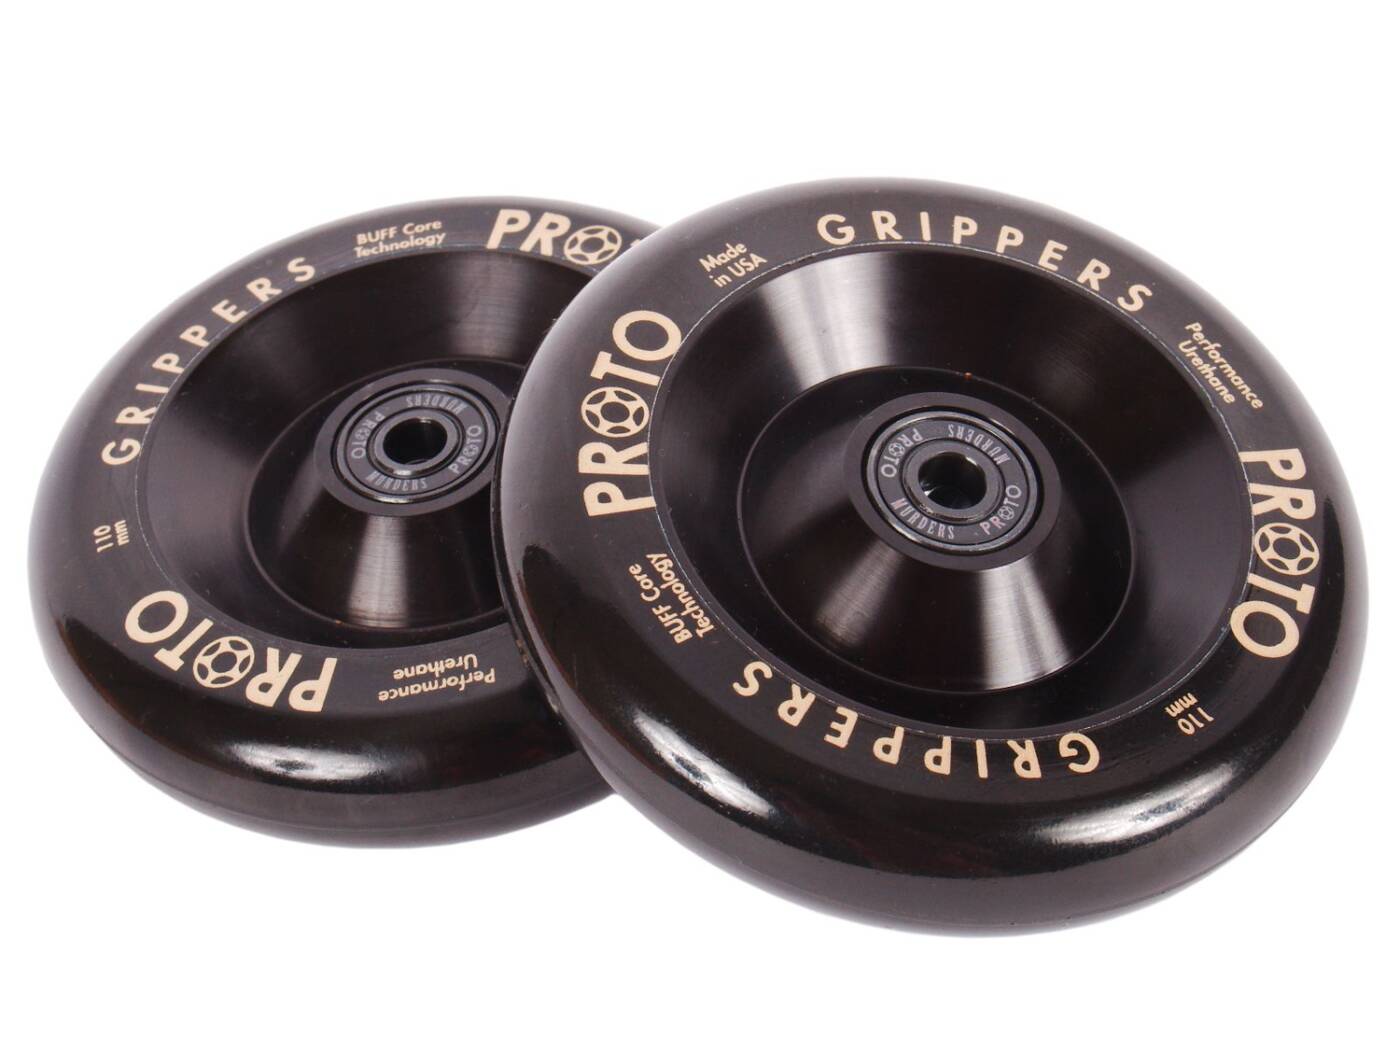 Proto Full Core Grippers Pro Scooter Wheel 2-Pack - Black